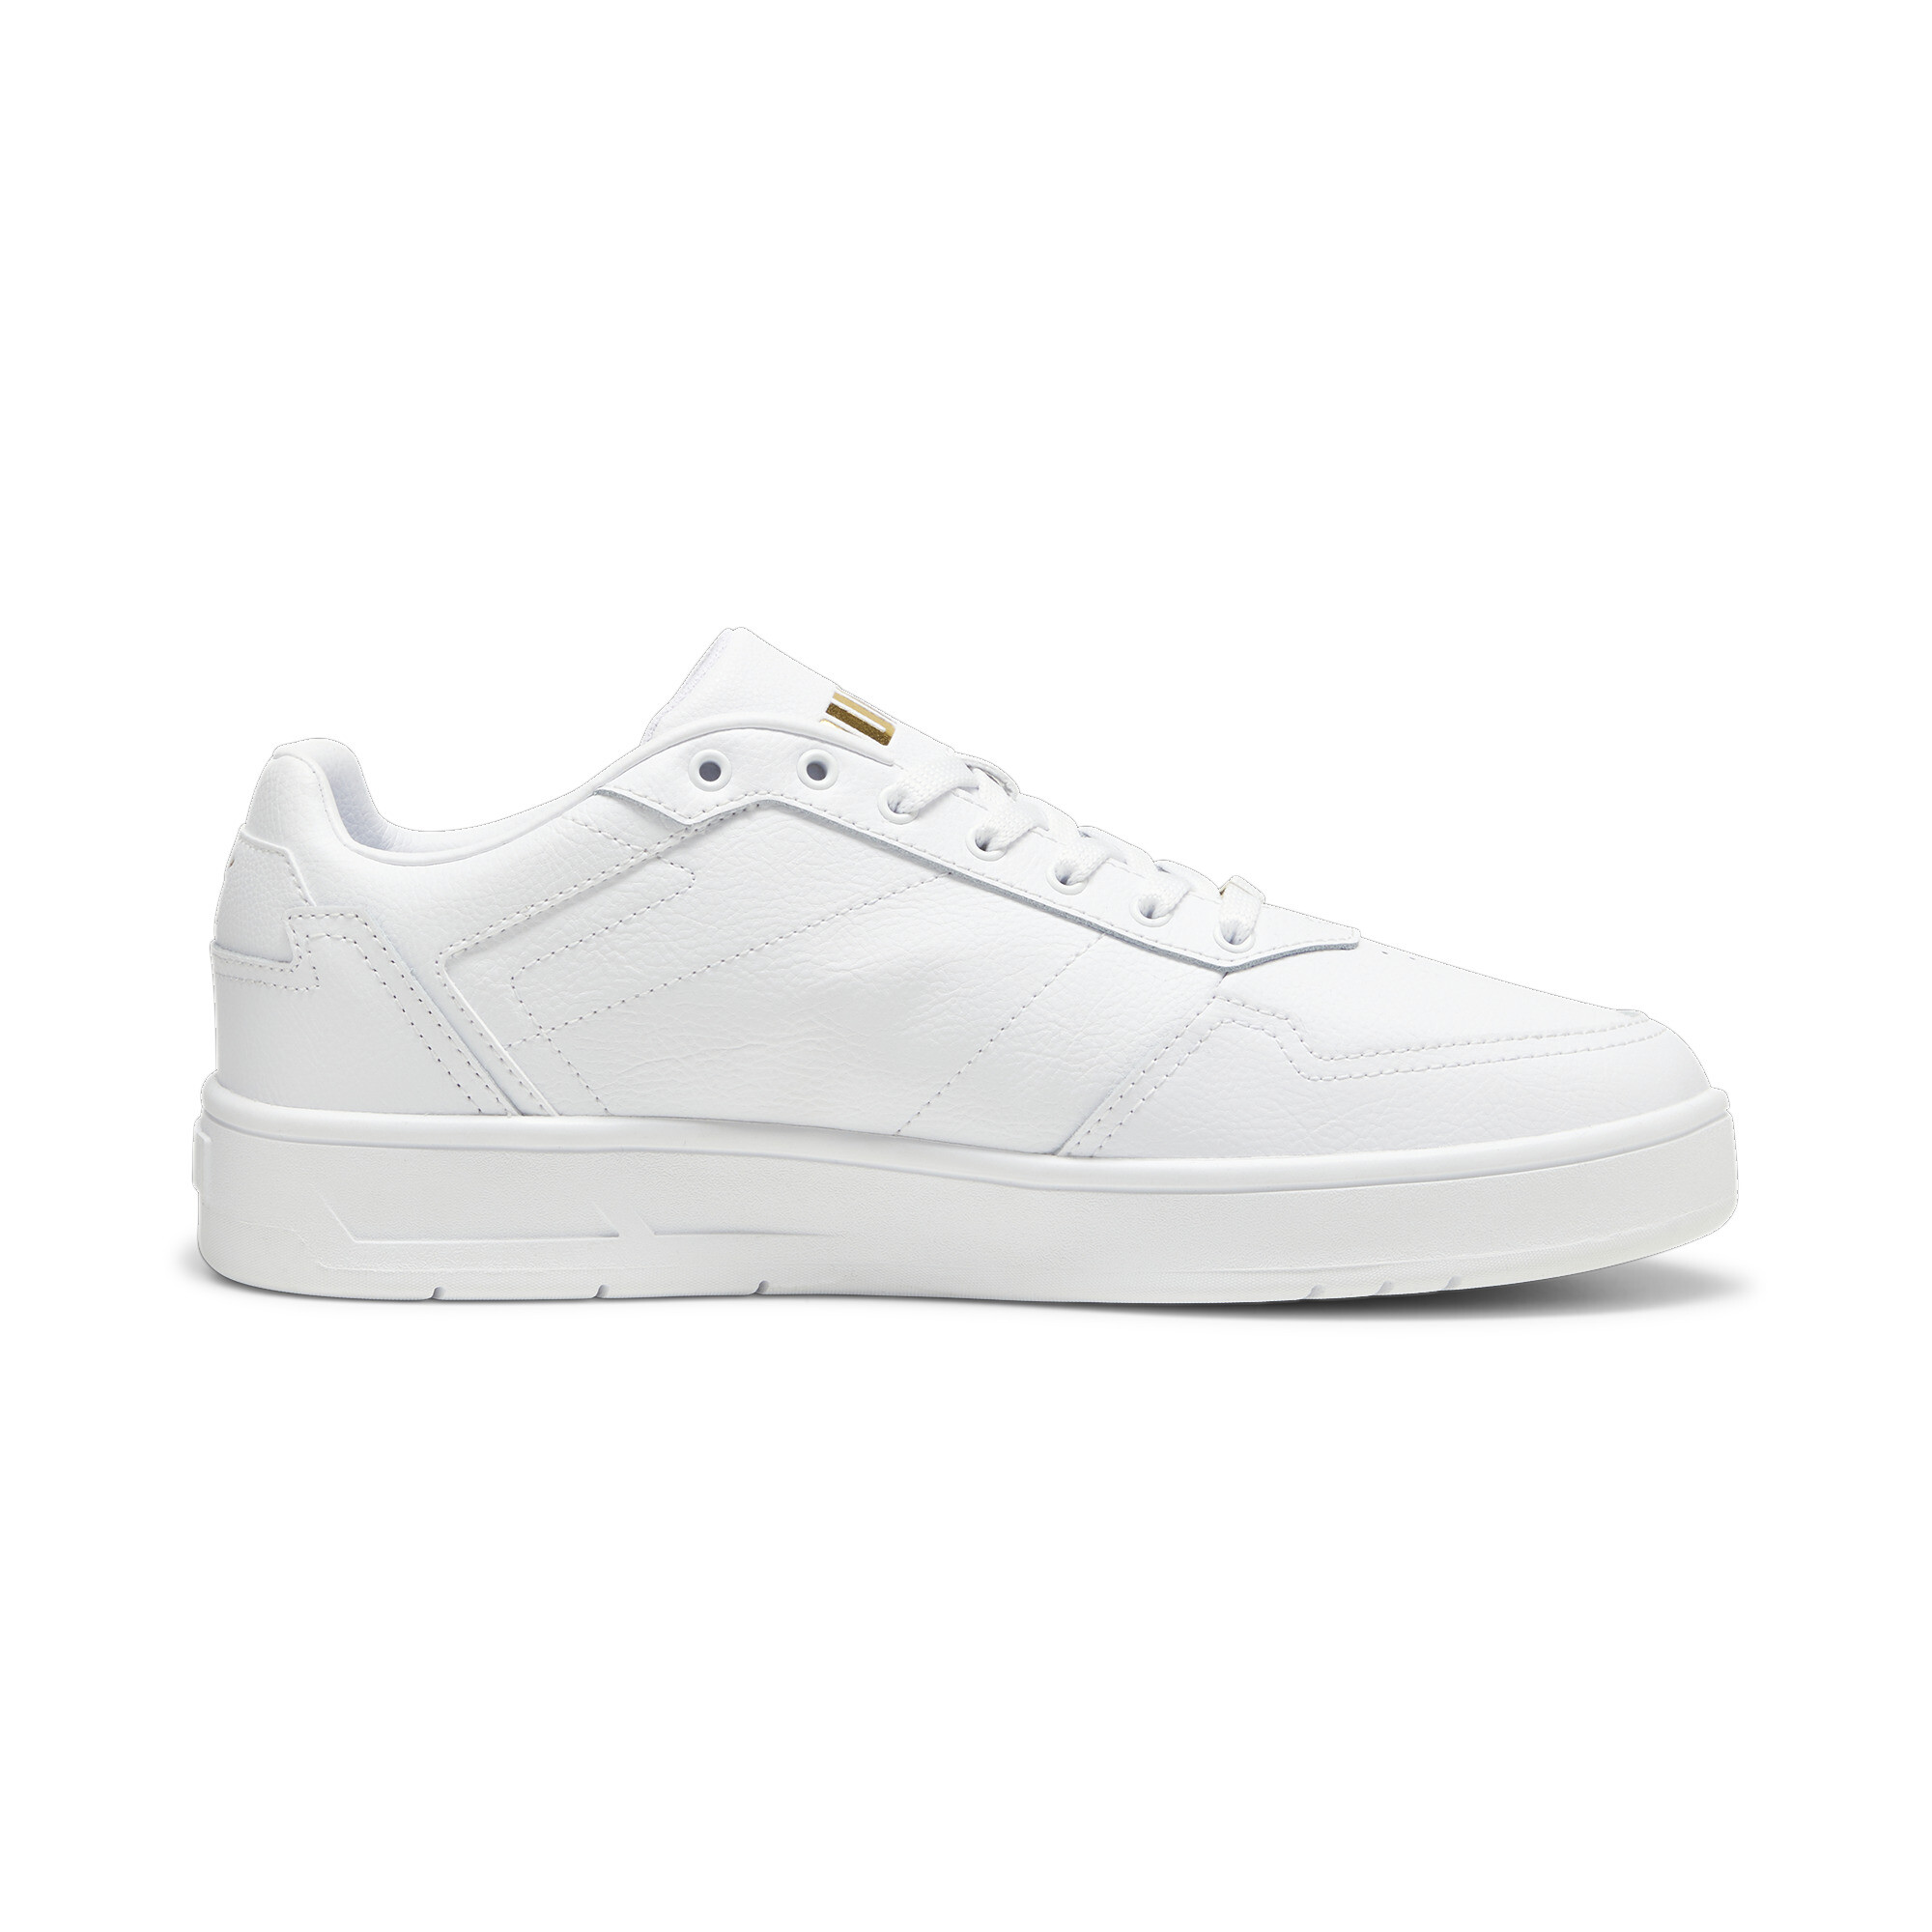 Puma Court Classic Lux Sneakers, White, Size 44, Shoes